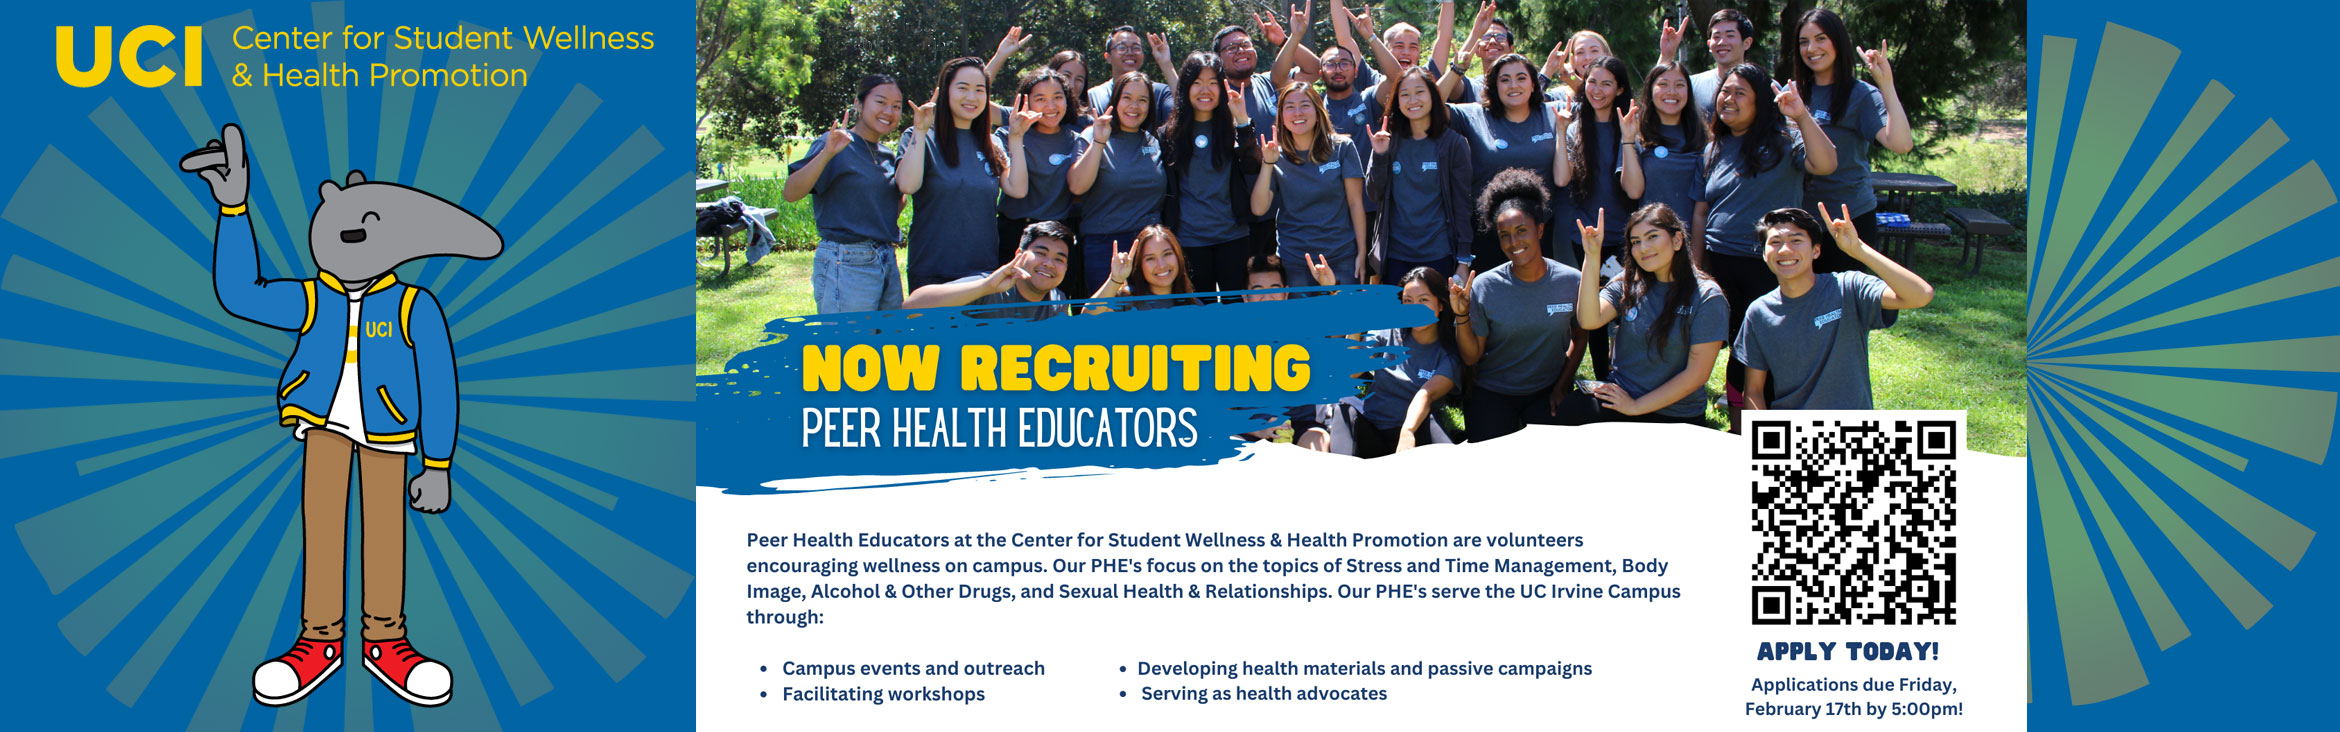 Center for Student Wellness and Health Promotion is now recruiting Peer Health Educators. 